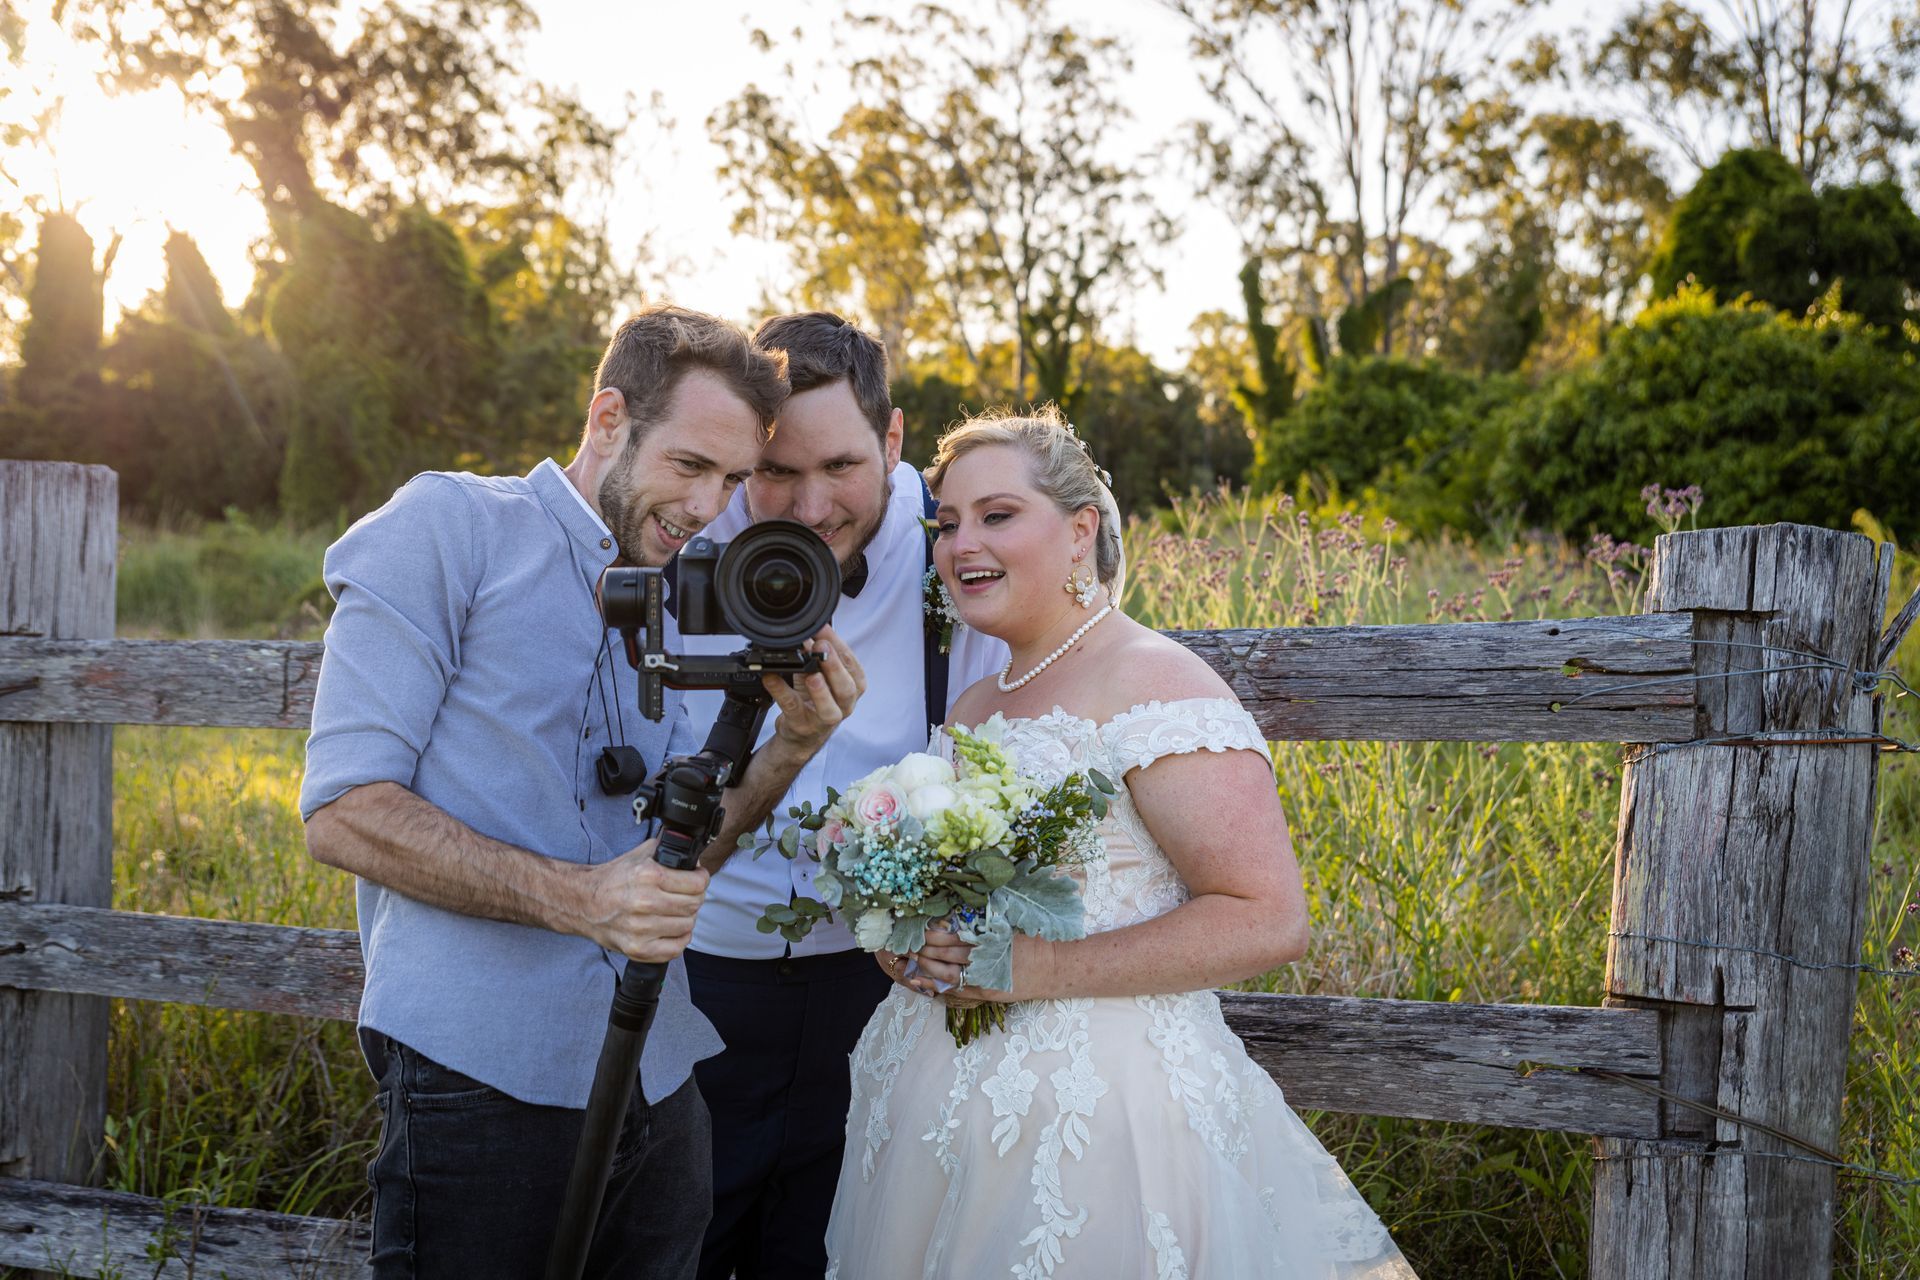 A bride and groom are posing for a picture with a cameraman.